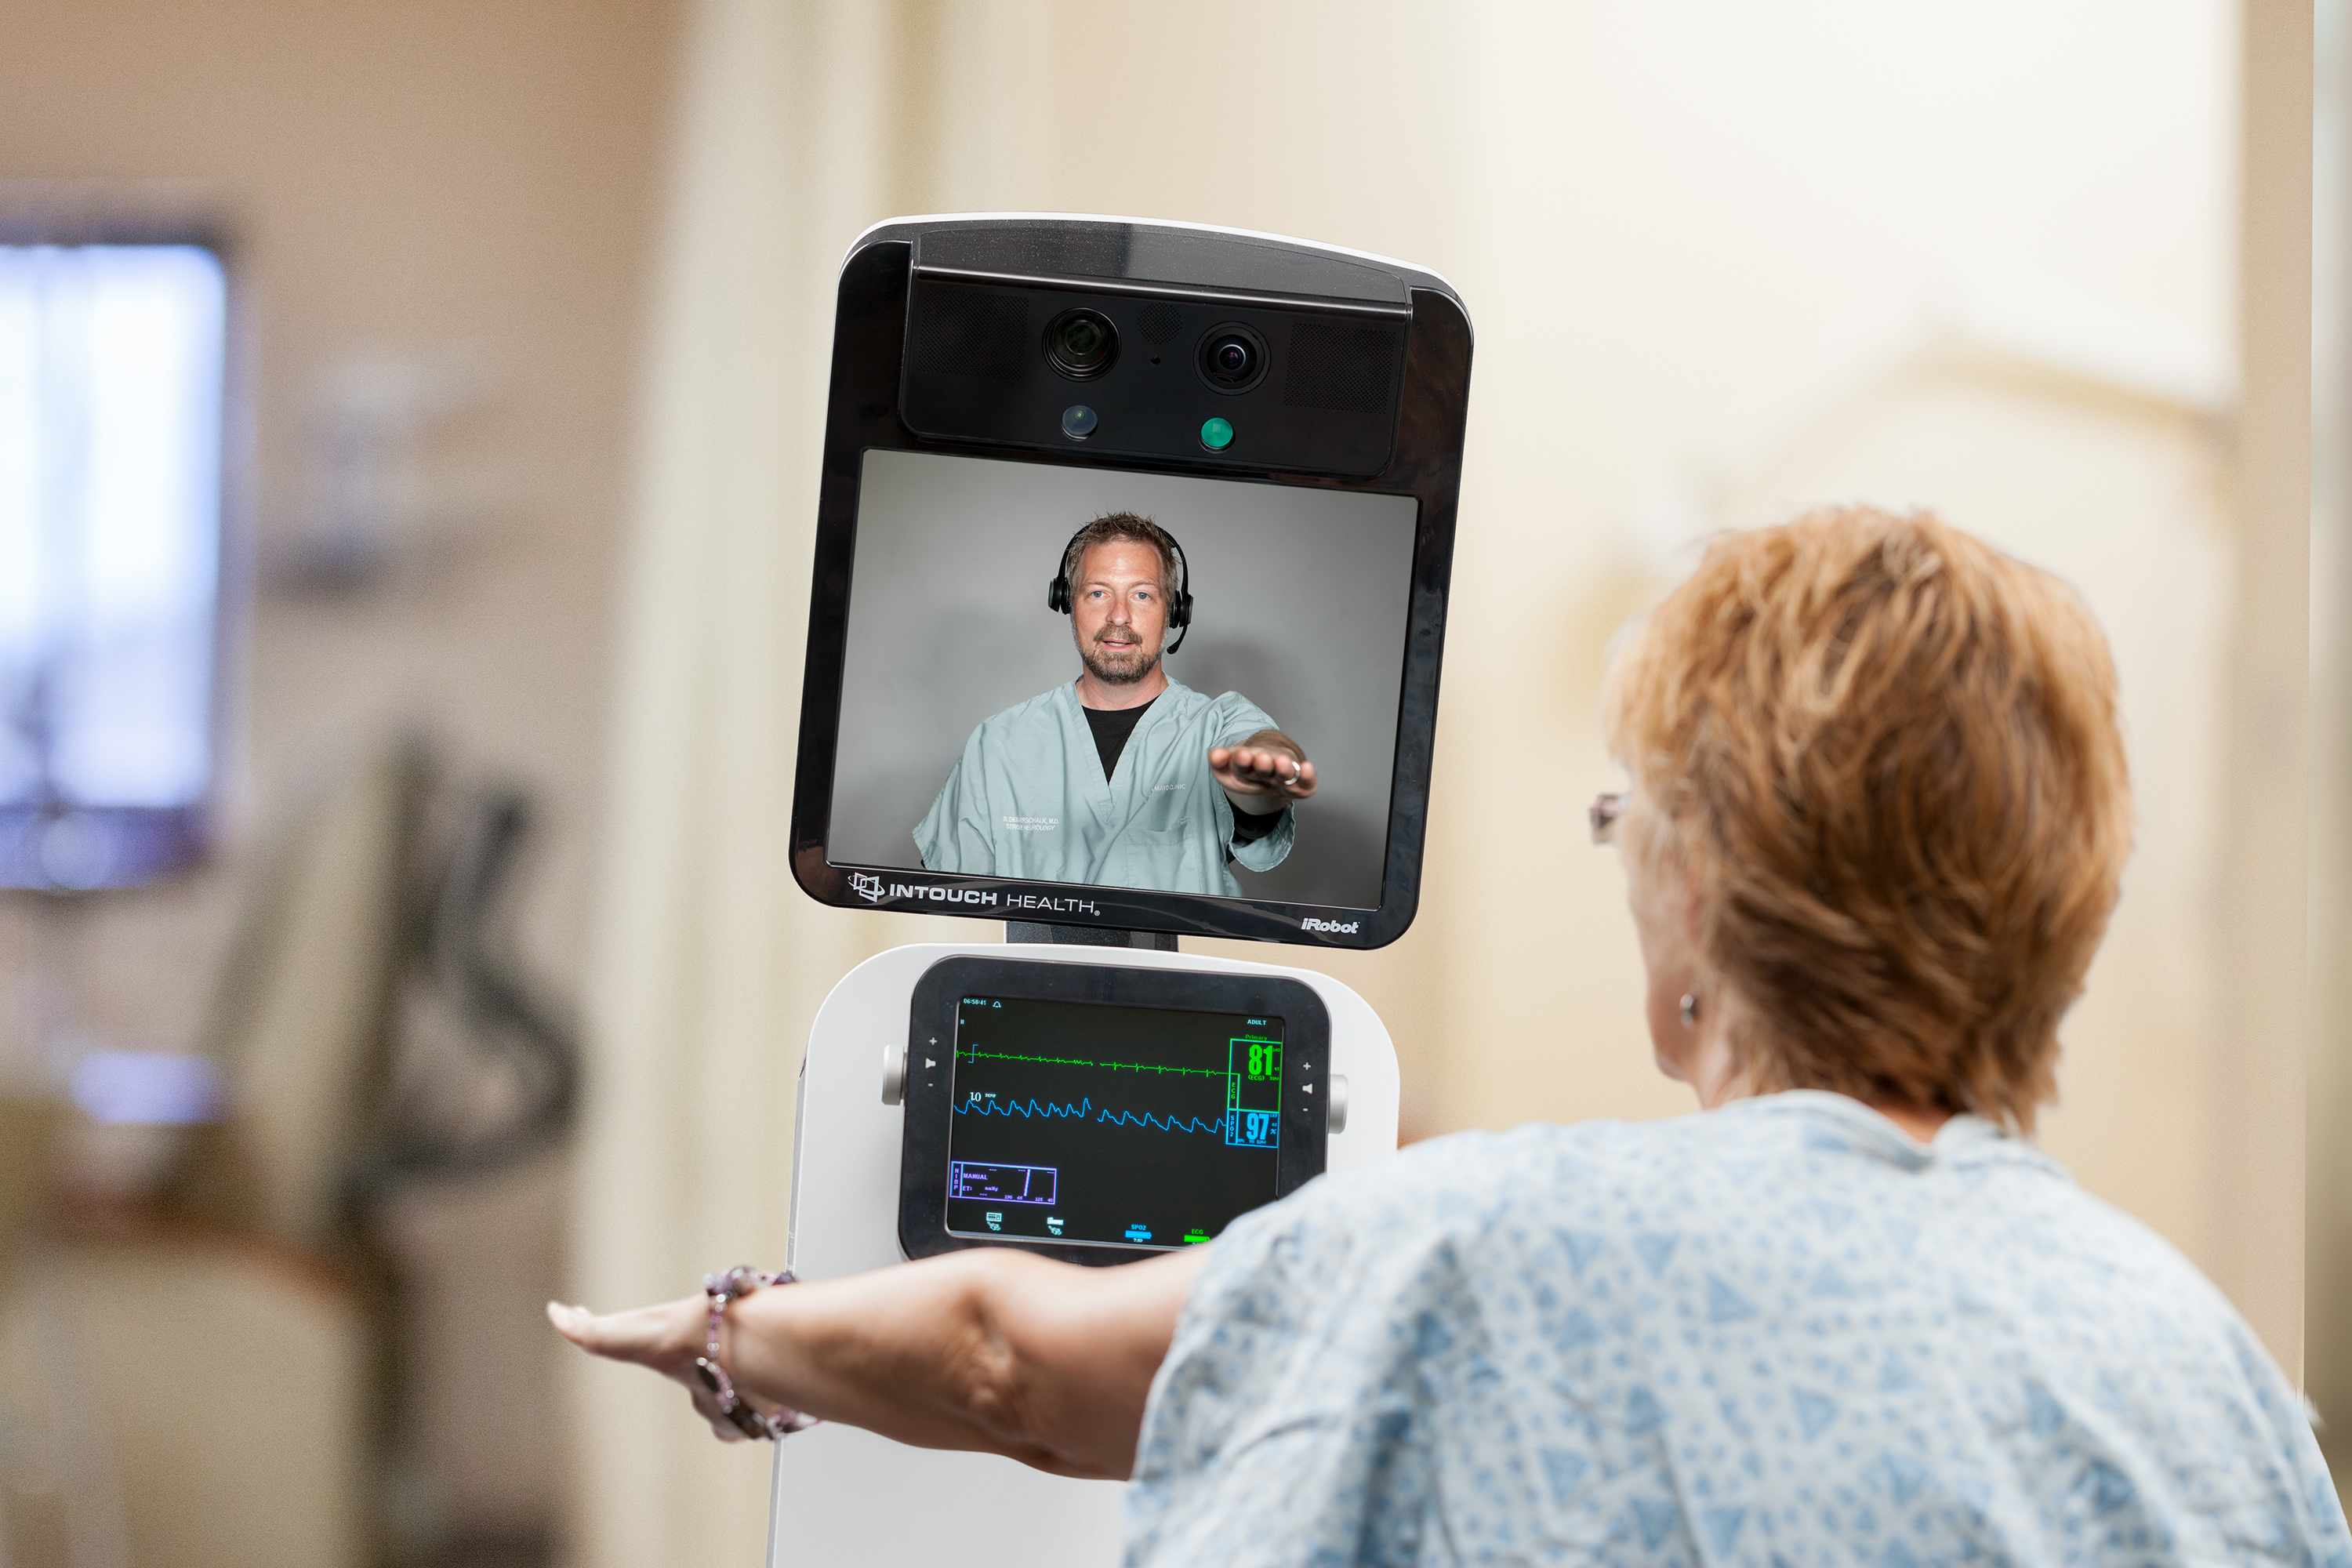 Patient looking at physician on telestroke machine